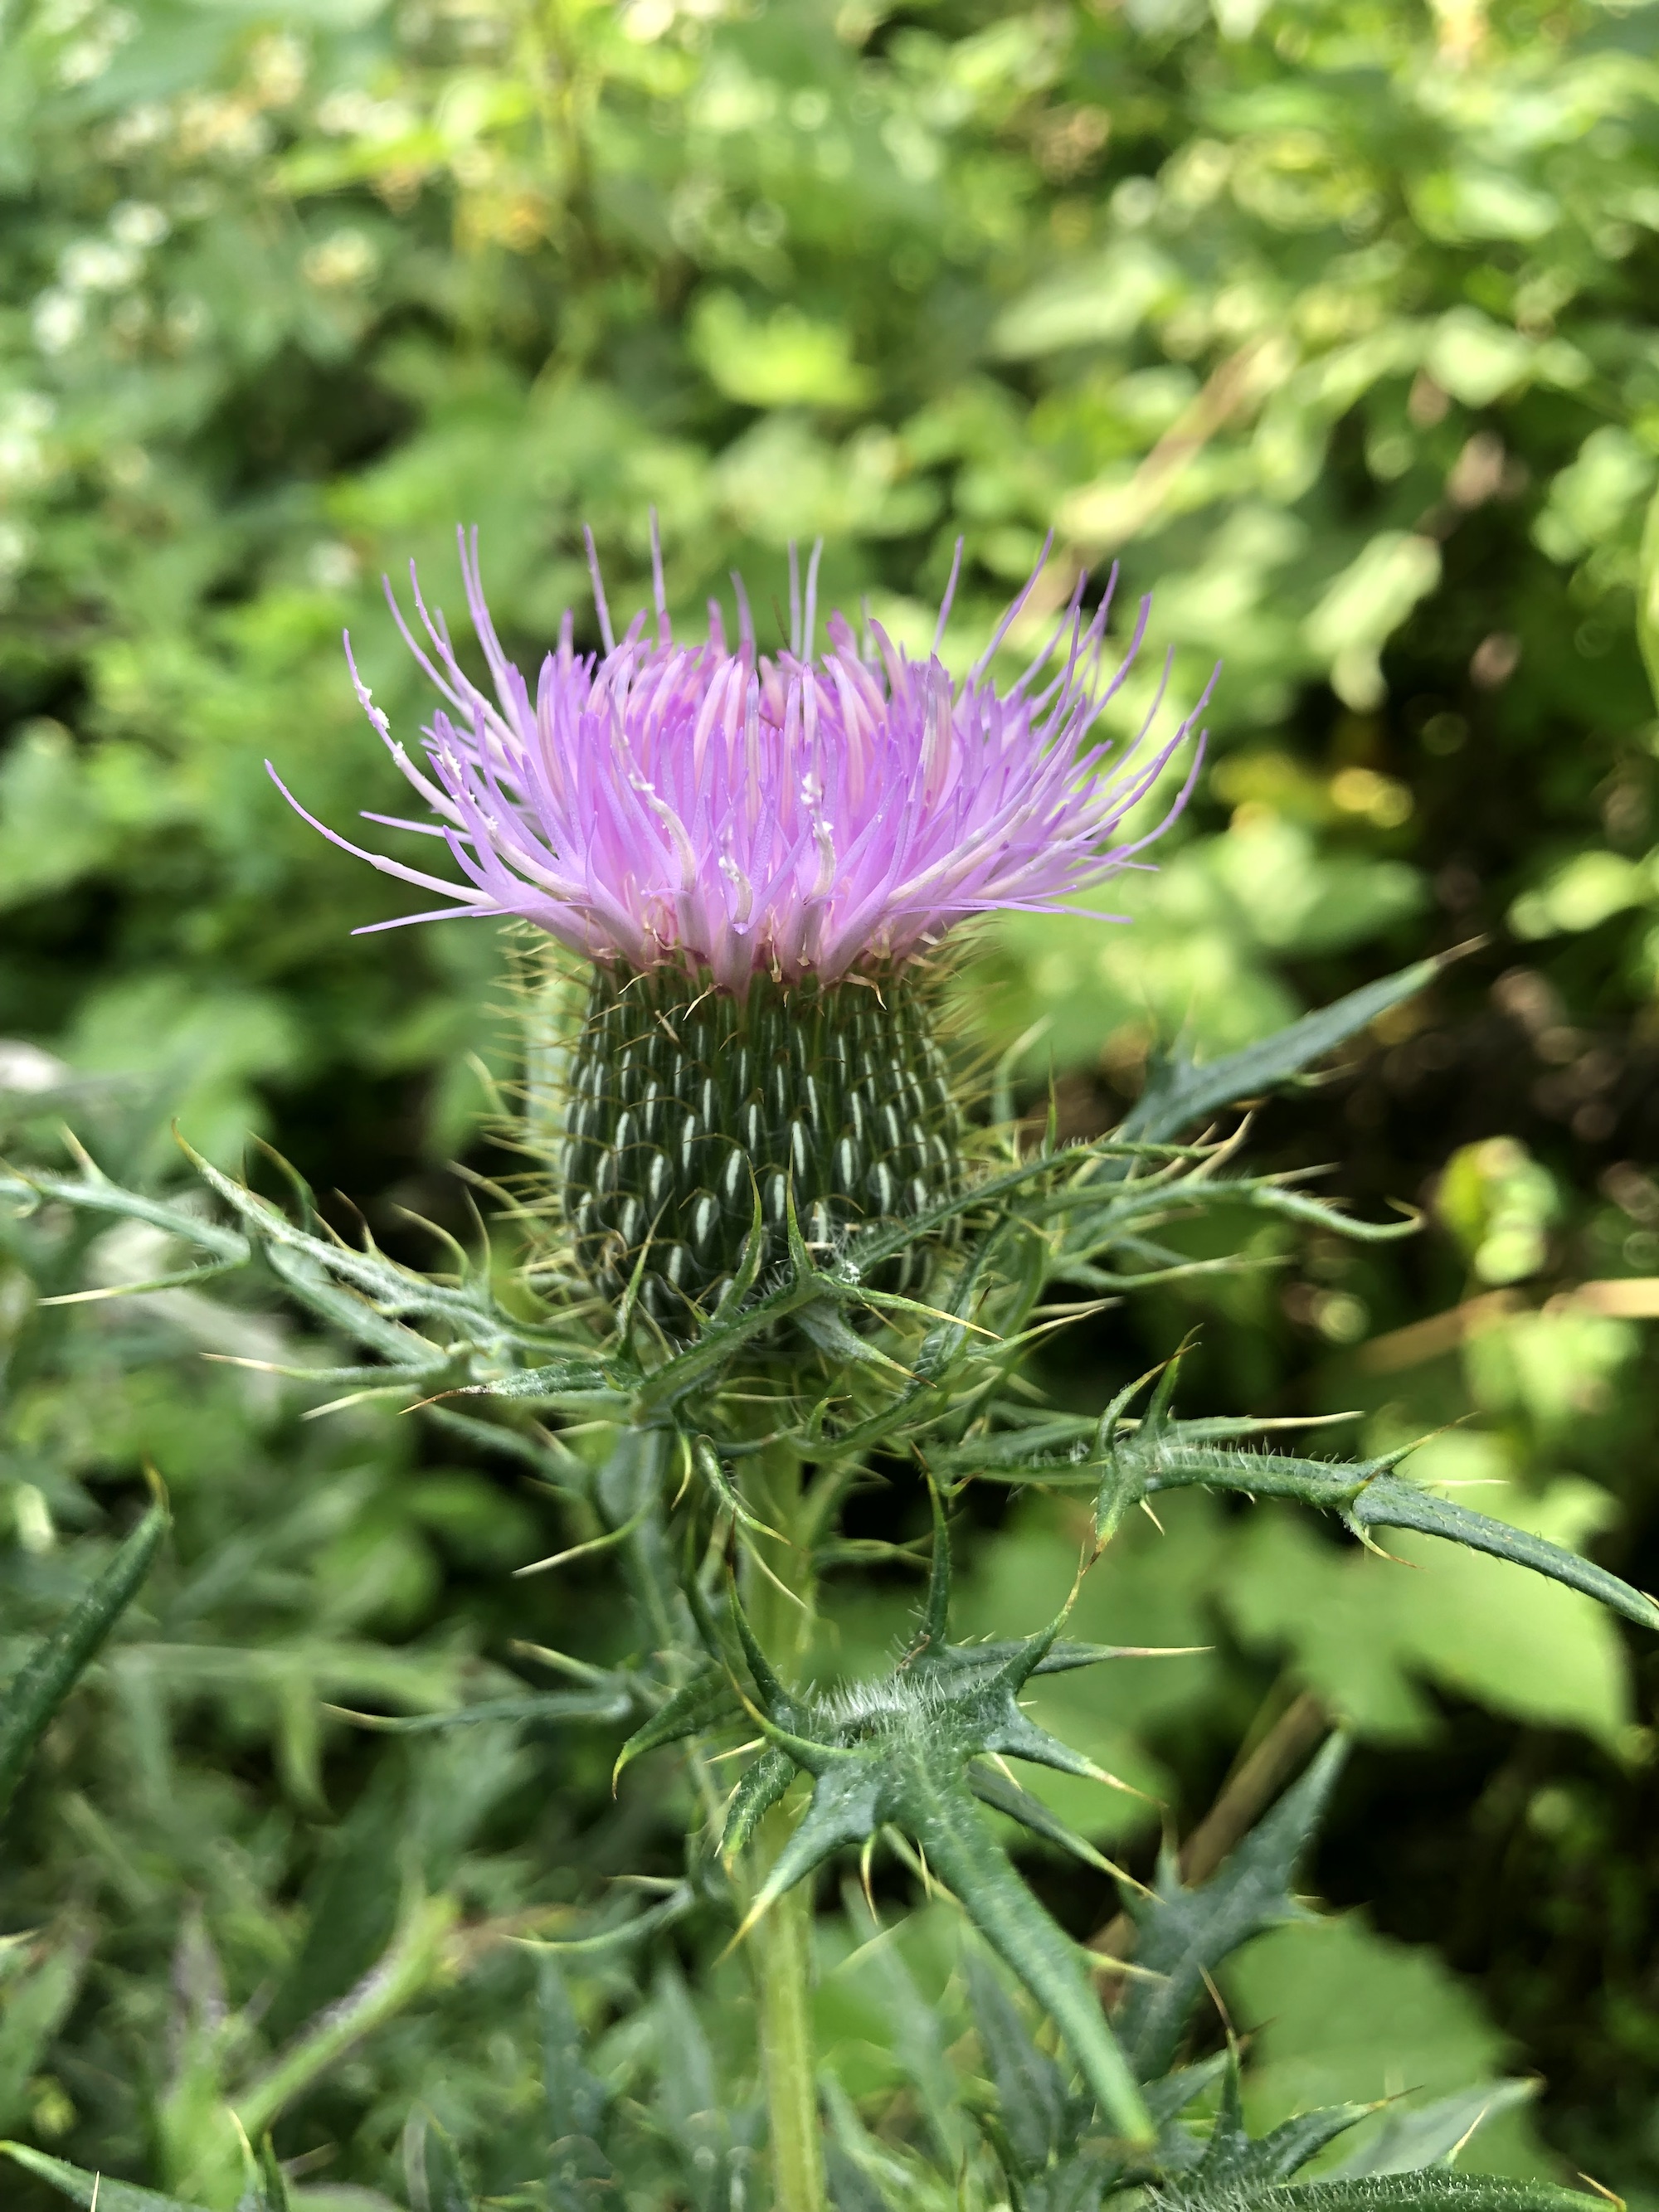 Field Thistle near Seminole Highway entrance to the UW Arborteum in Madison, Wisconsin on August 15, 2022.